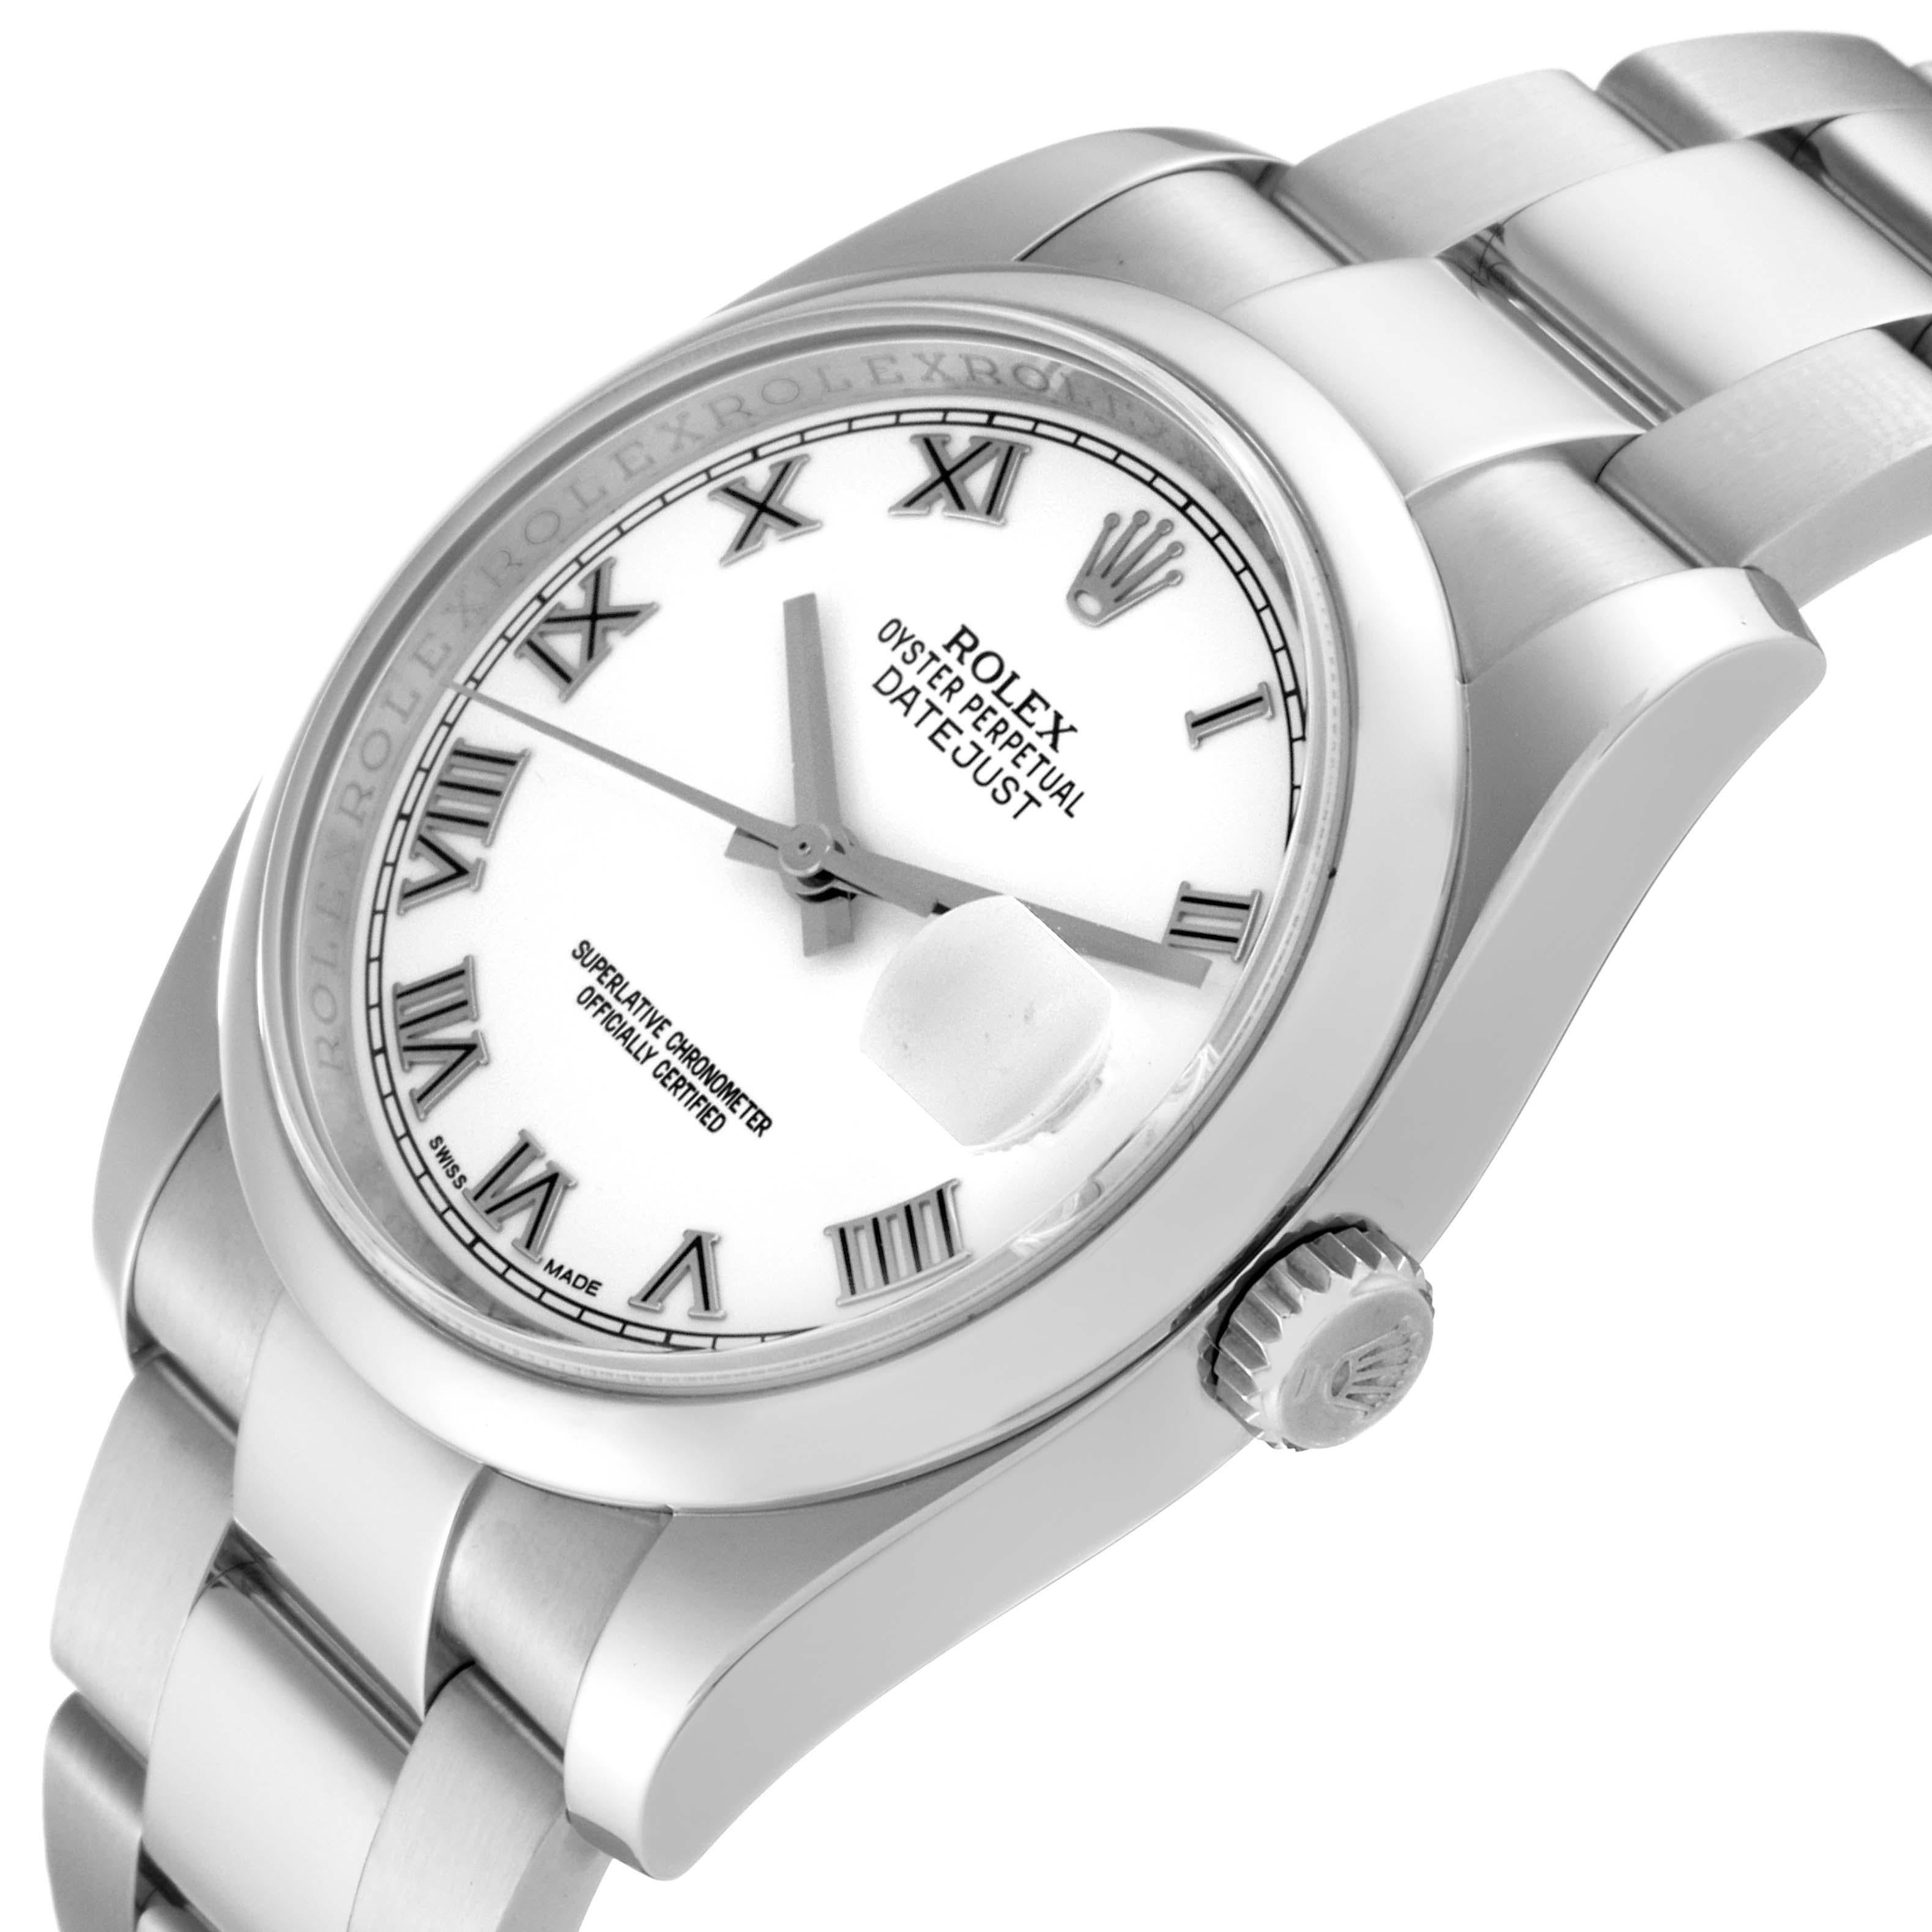 Rolex Datejust White Roman Dial Steel Mens Watch 116200 Box Card In Excellent Condition For Sale In Atlanta, GA